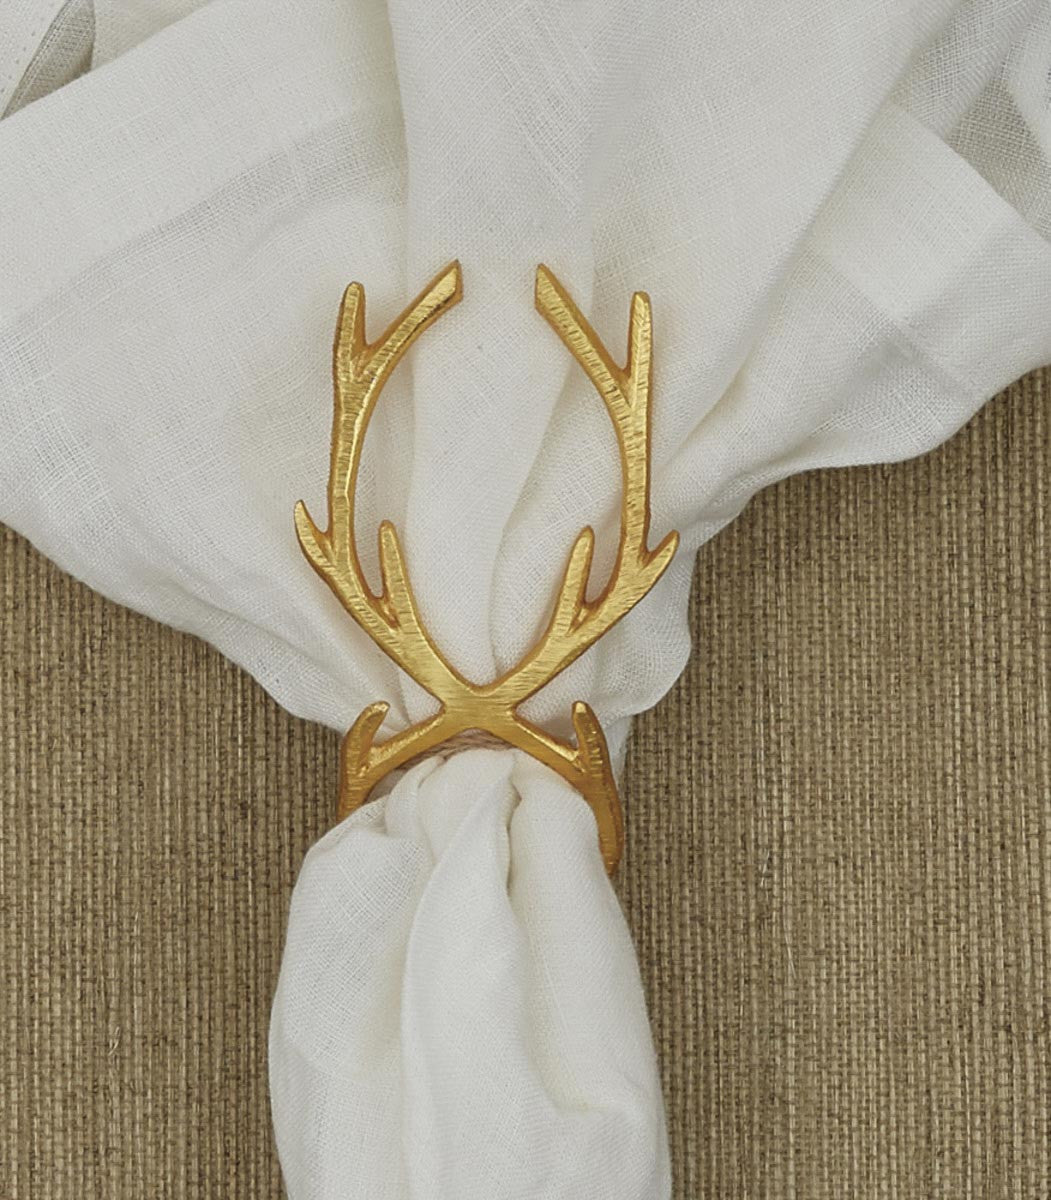 golden napkin ring with antlers on top on a white napkin.